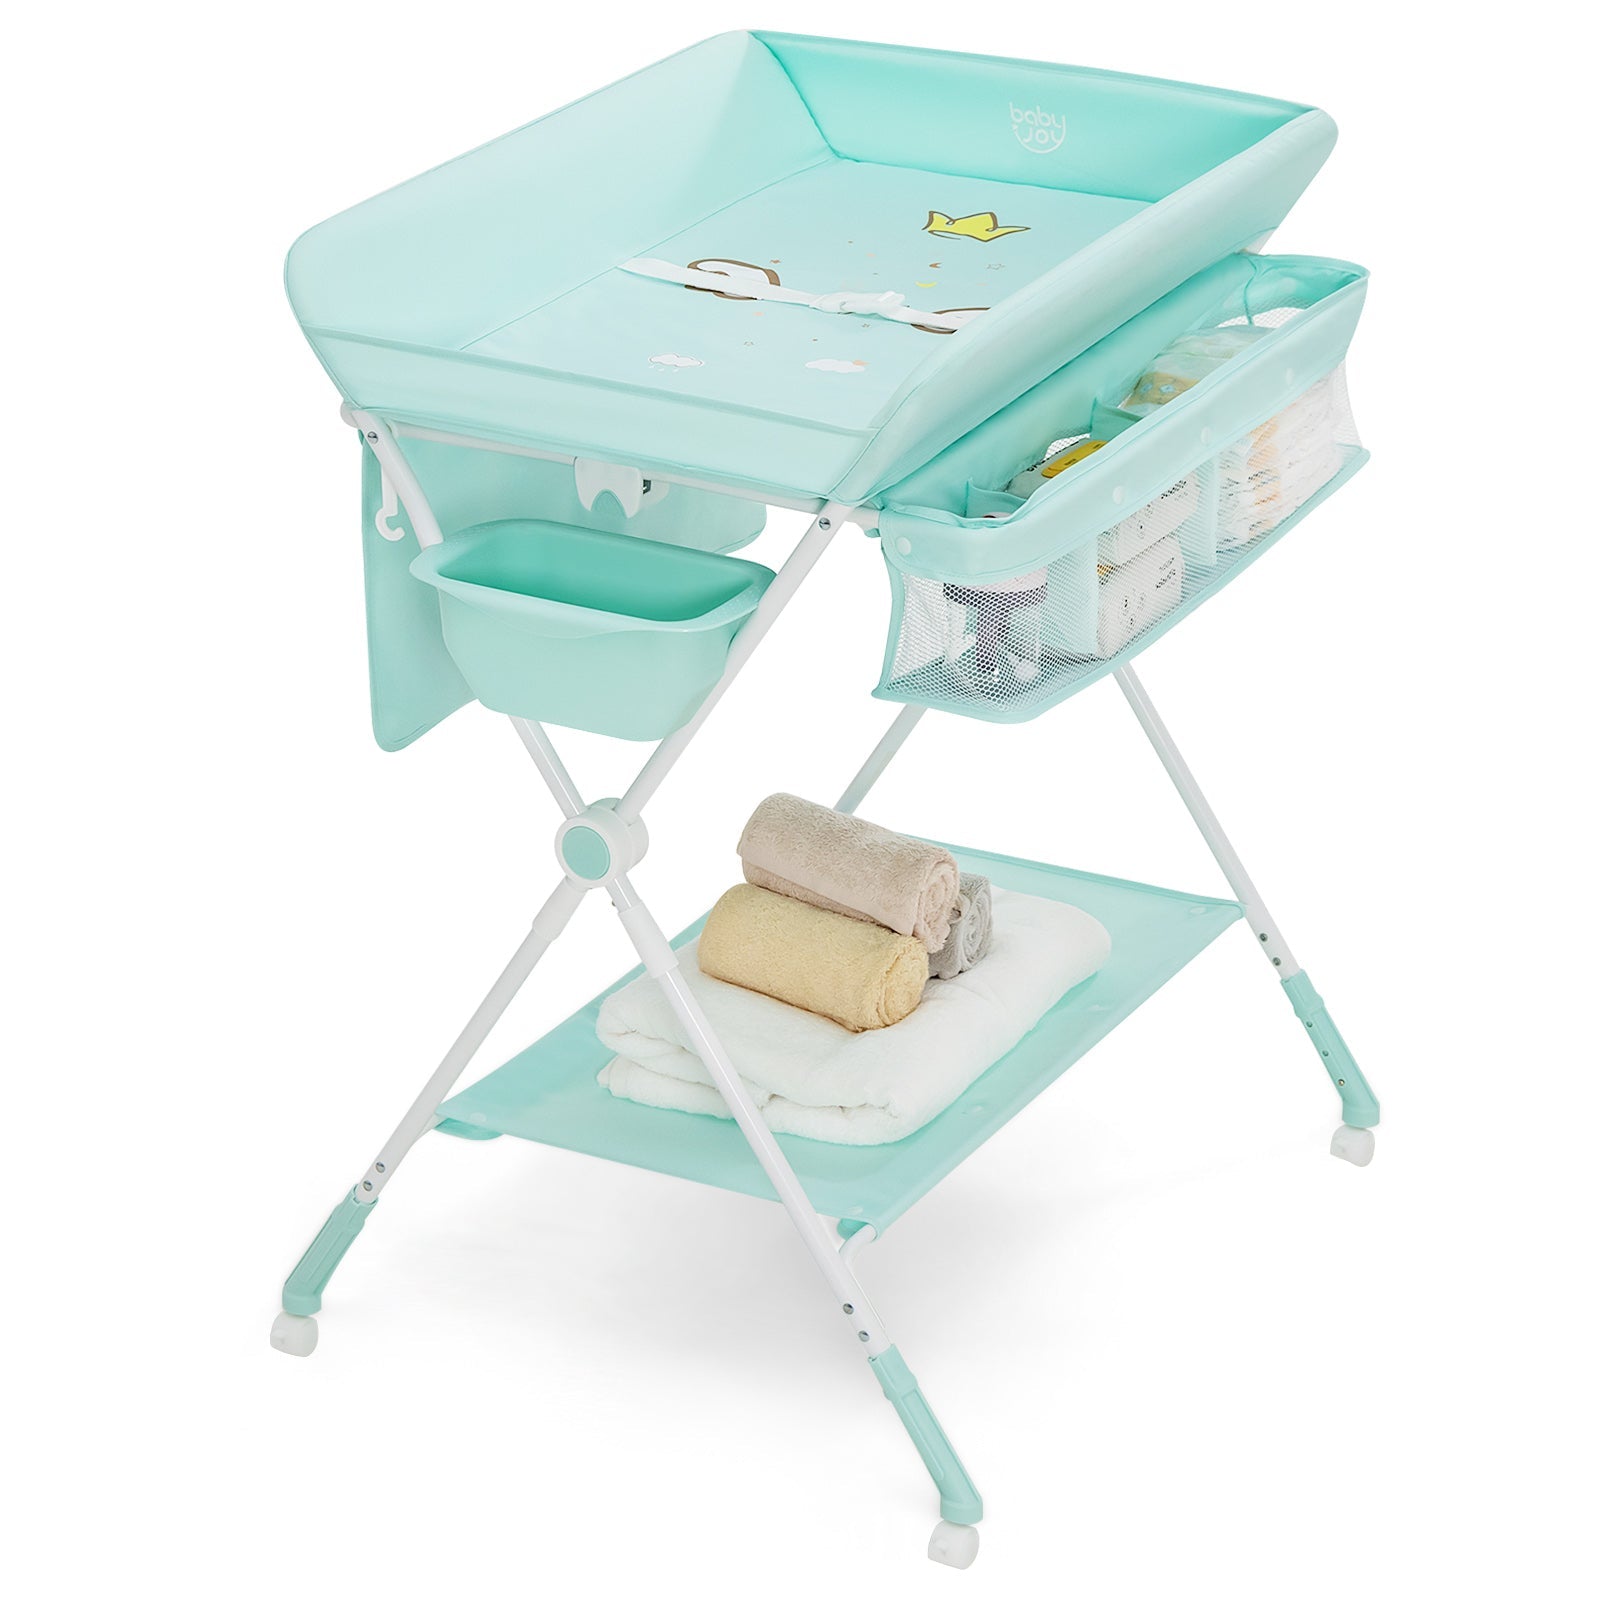 Foldable Baby Changing Table - Portable Solution for Newborns